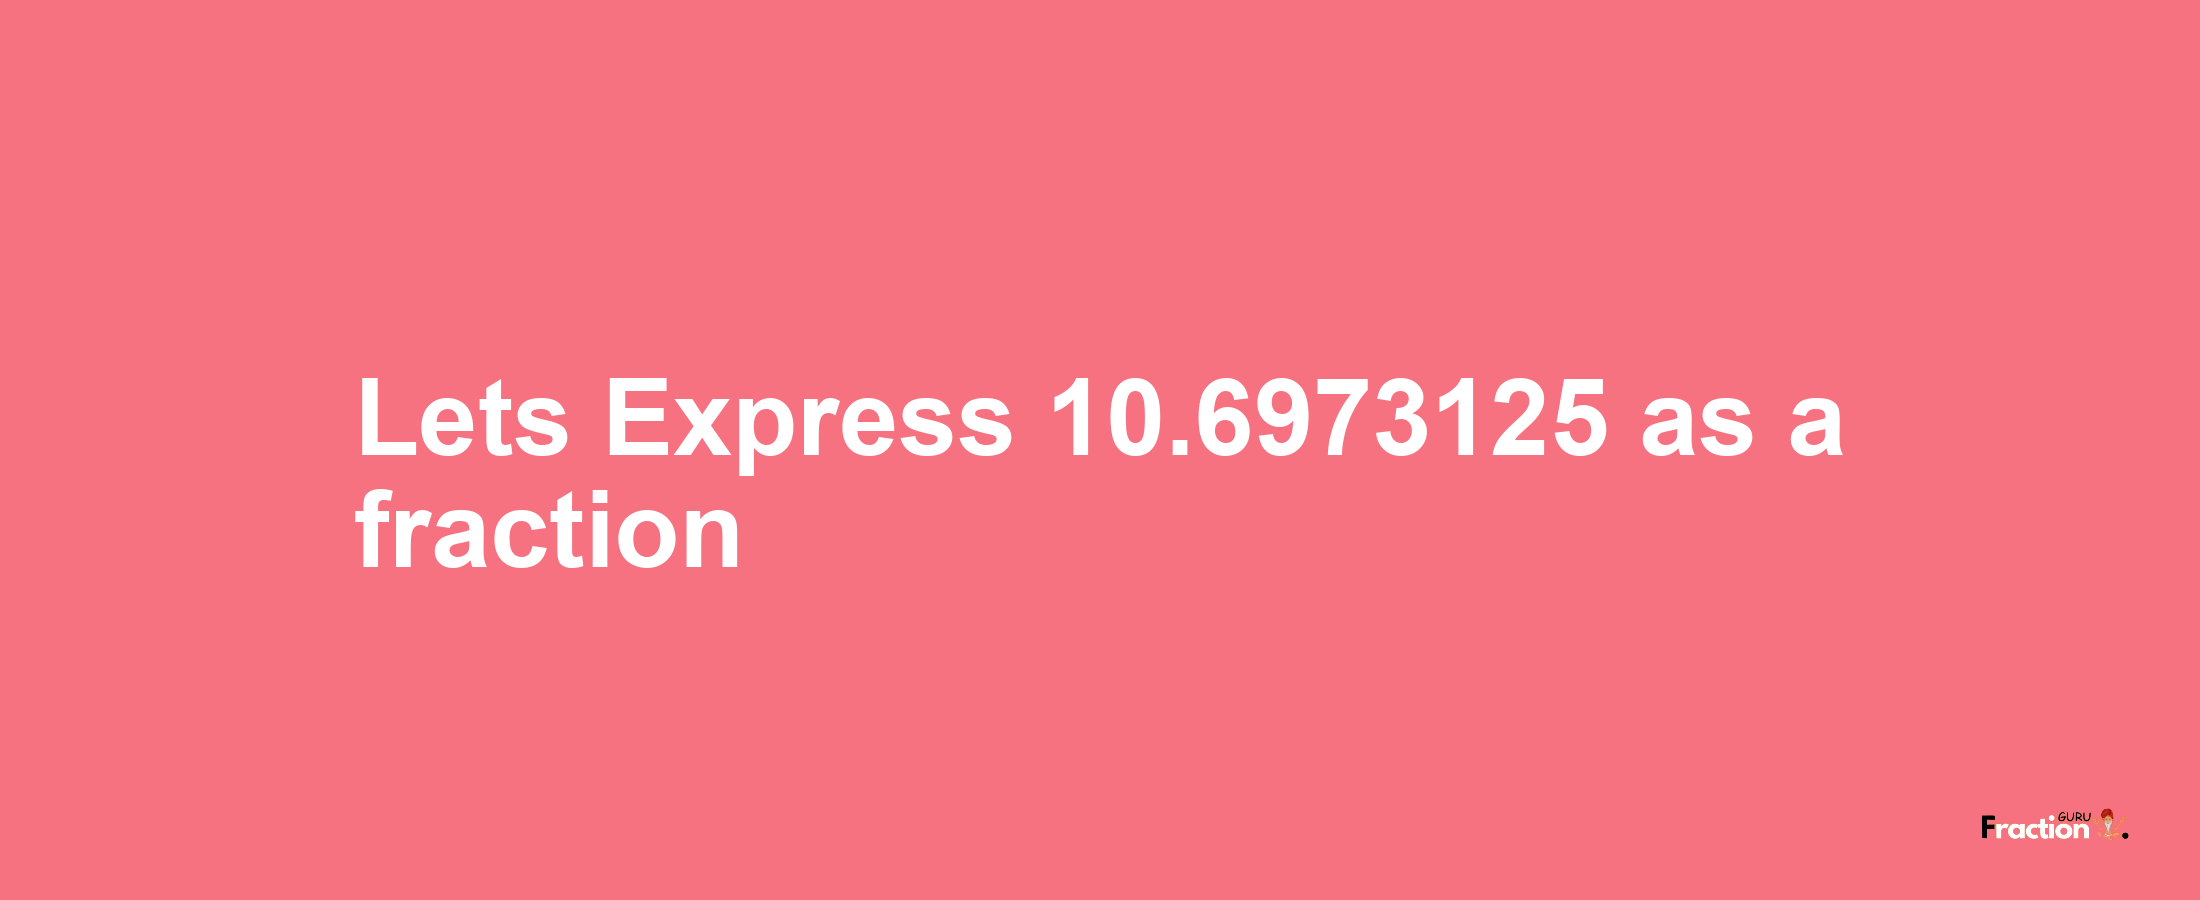 Lets Express 10.6973125 as afraction